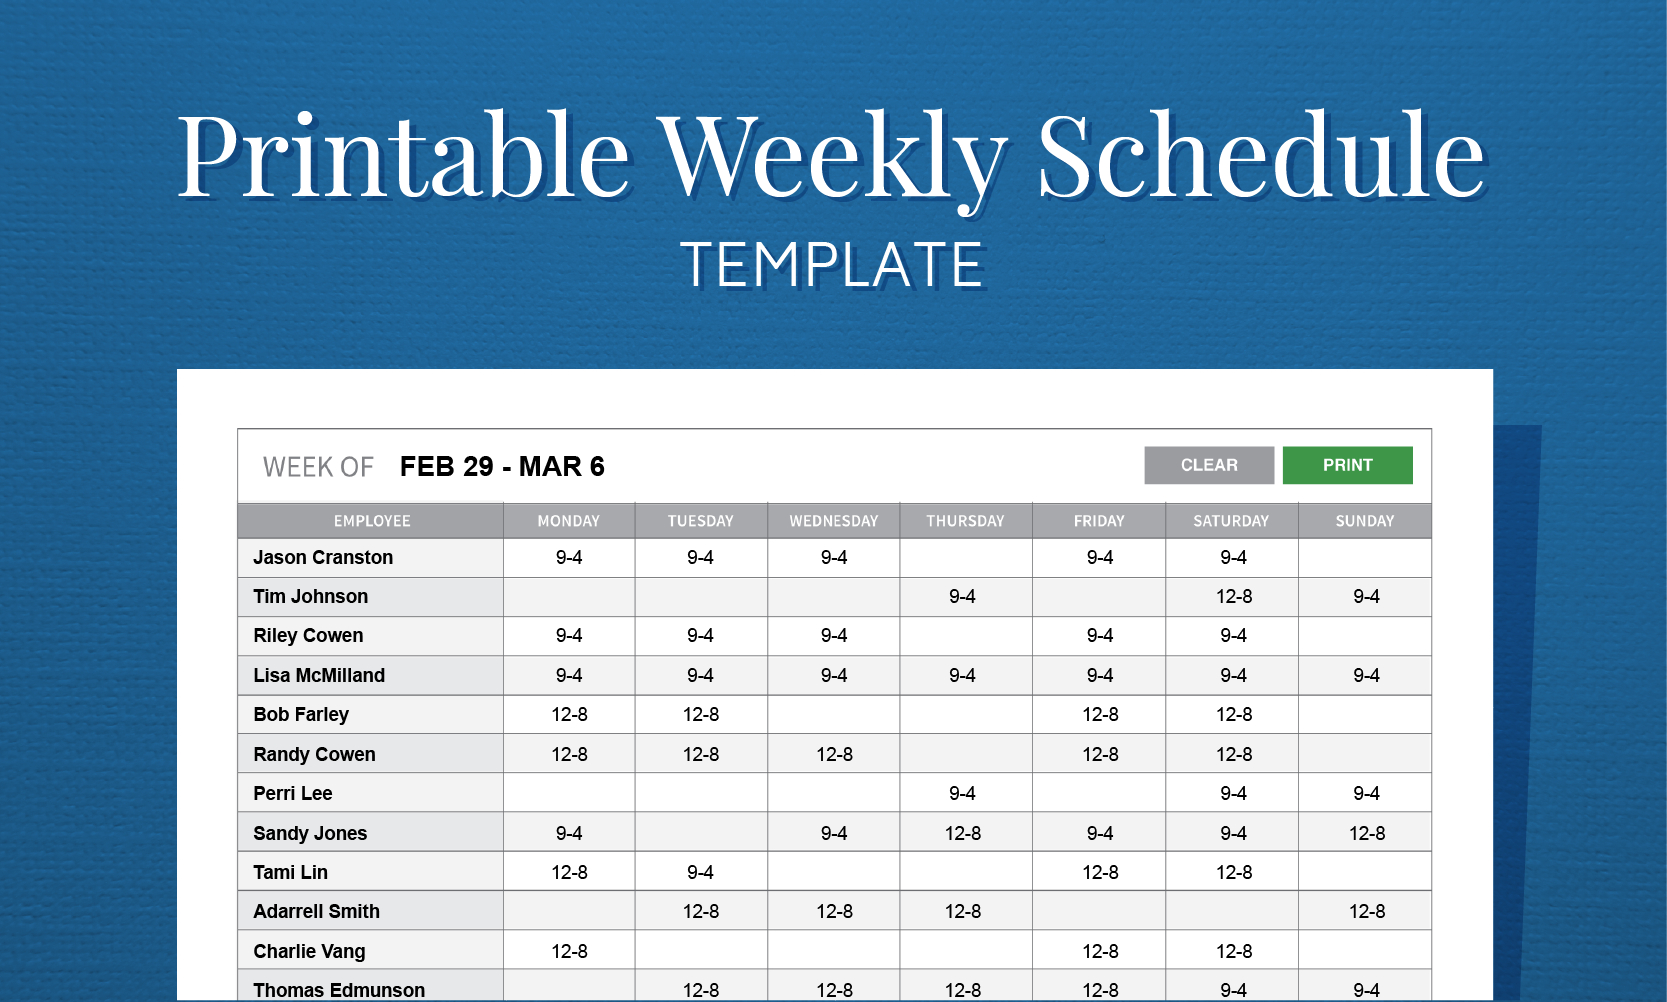 Employee Schedule Spreadsheet Template For Free Printable Weekly Work Schedule Template For Employee Scheduling